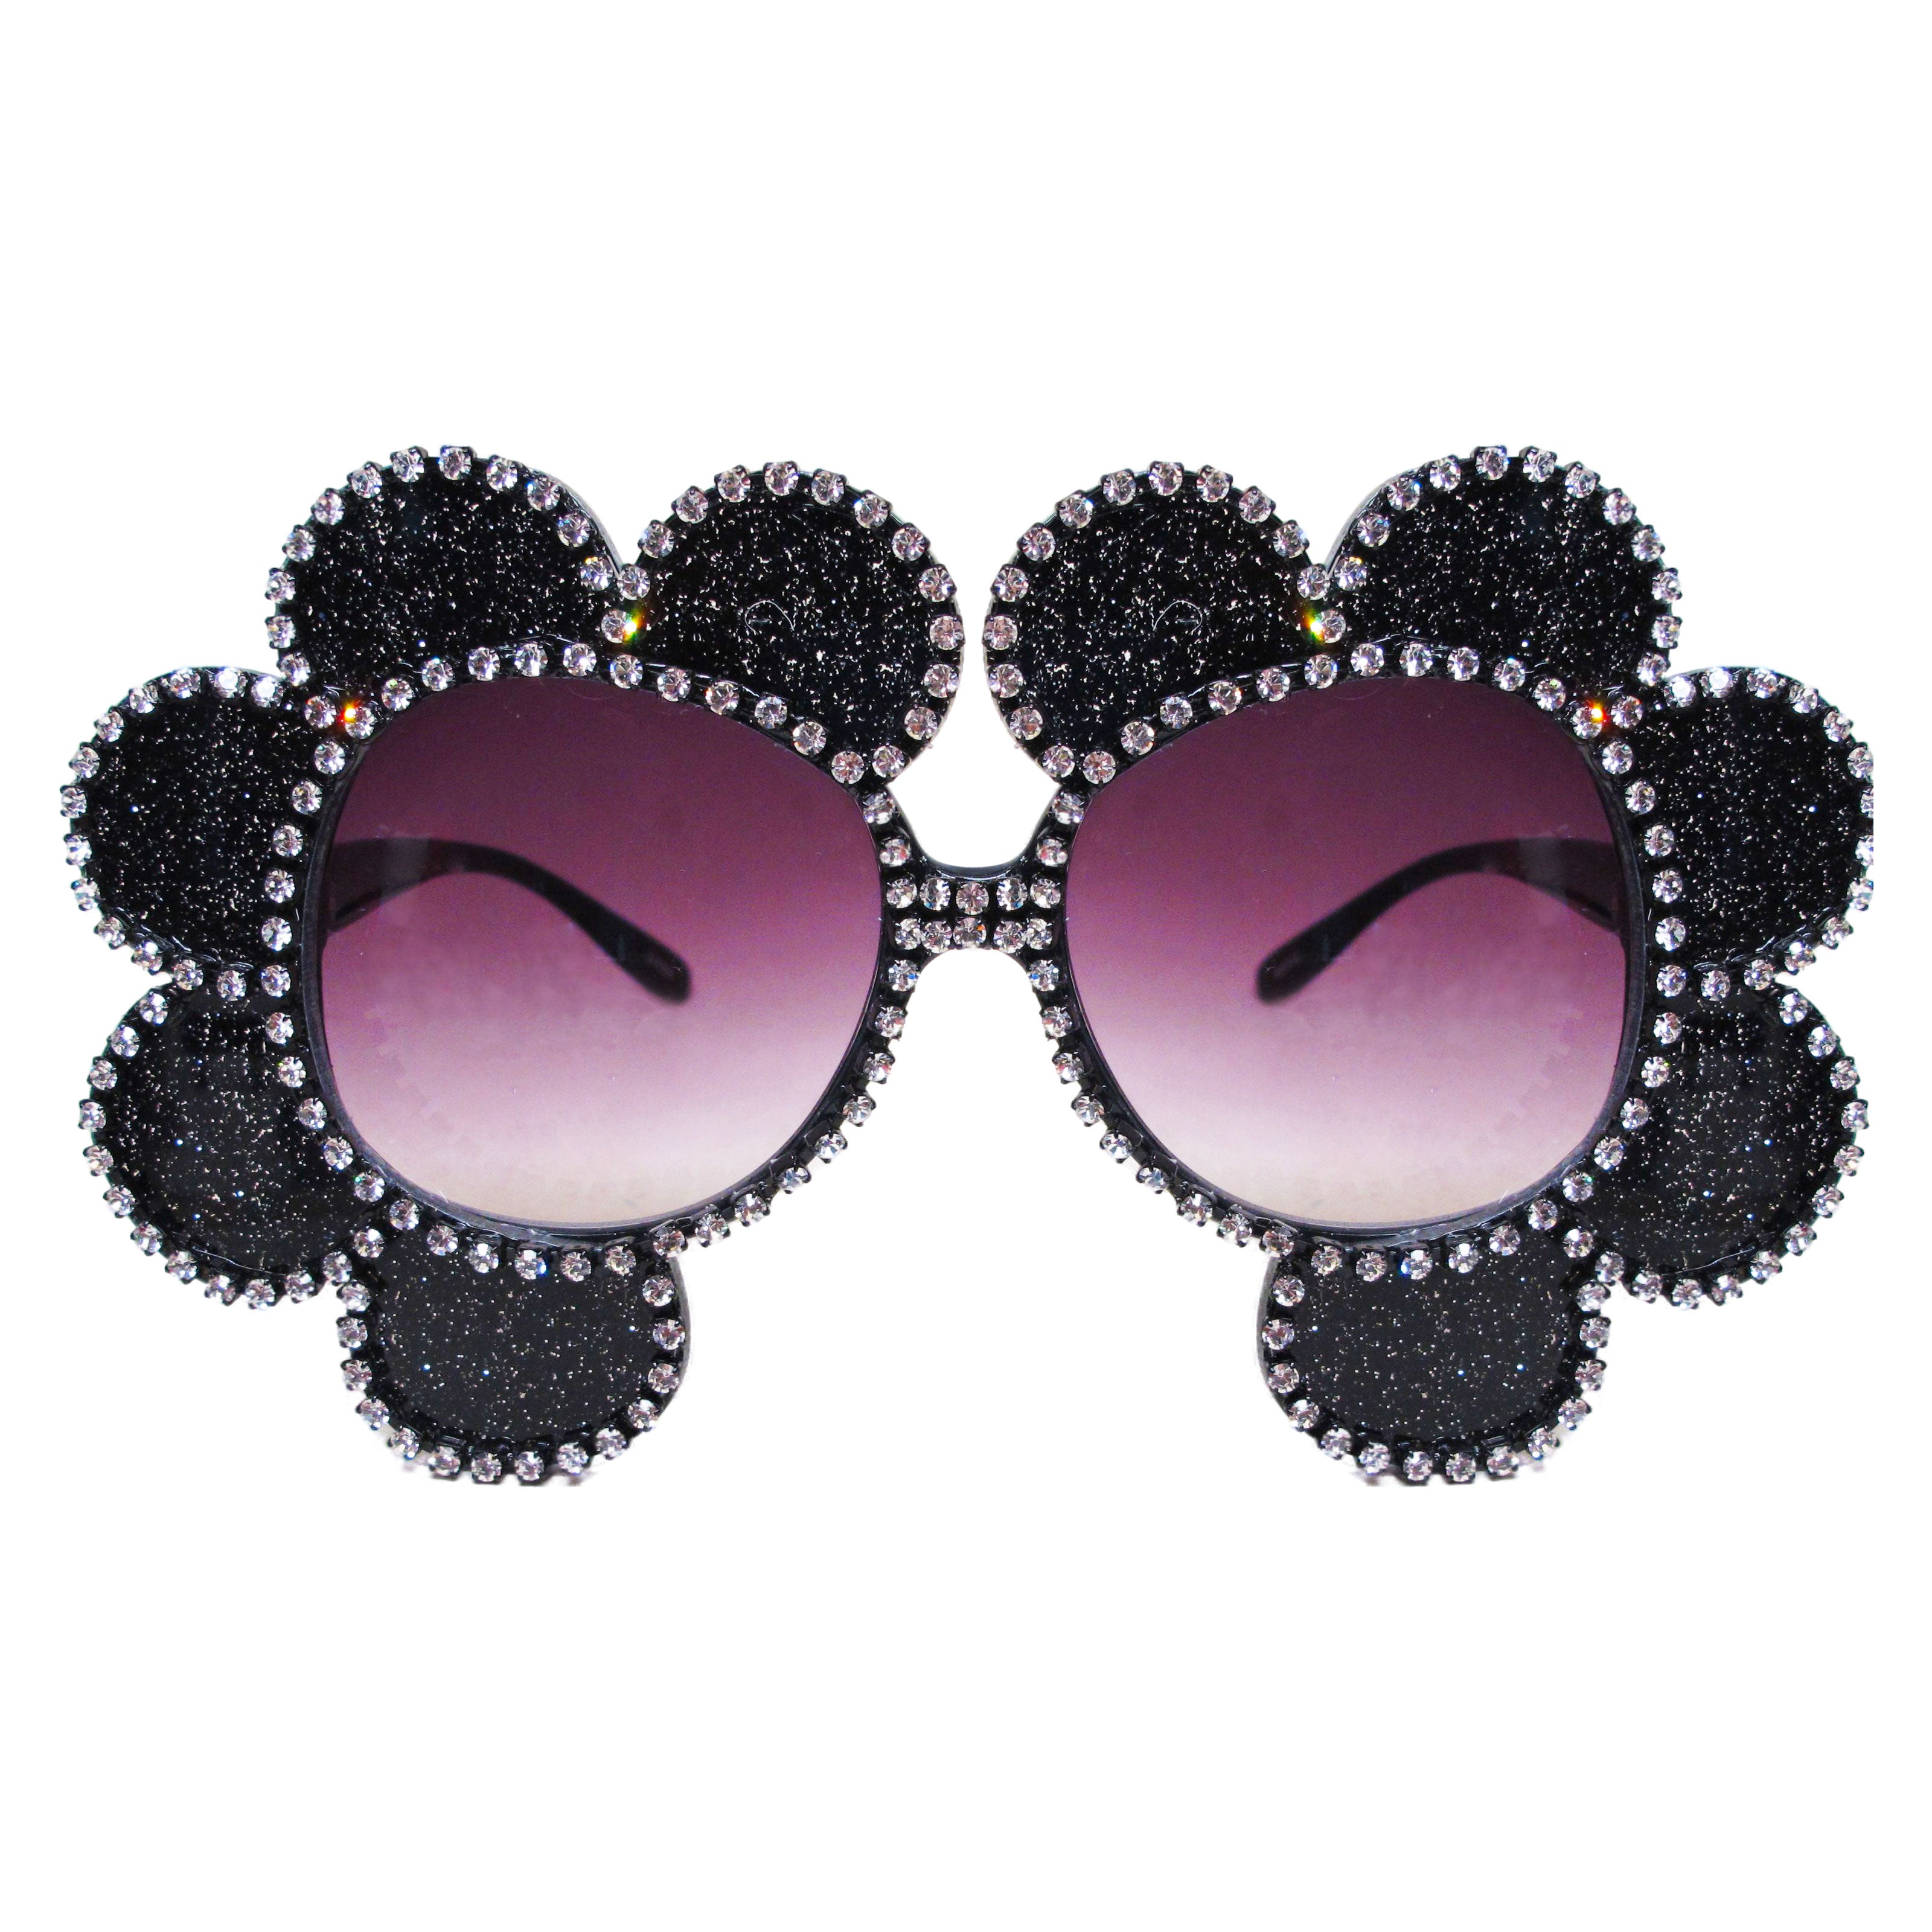 A-Morir | The Original Embellished Eyewear And Accessories